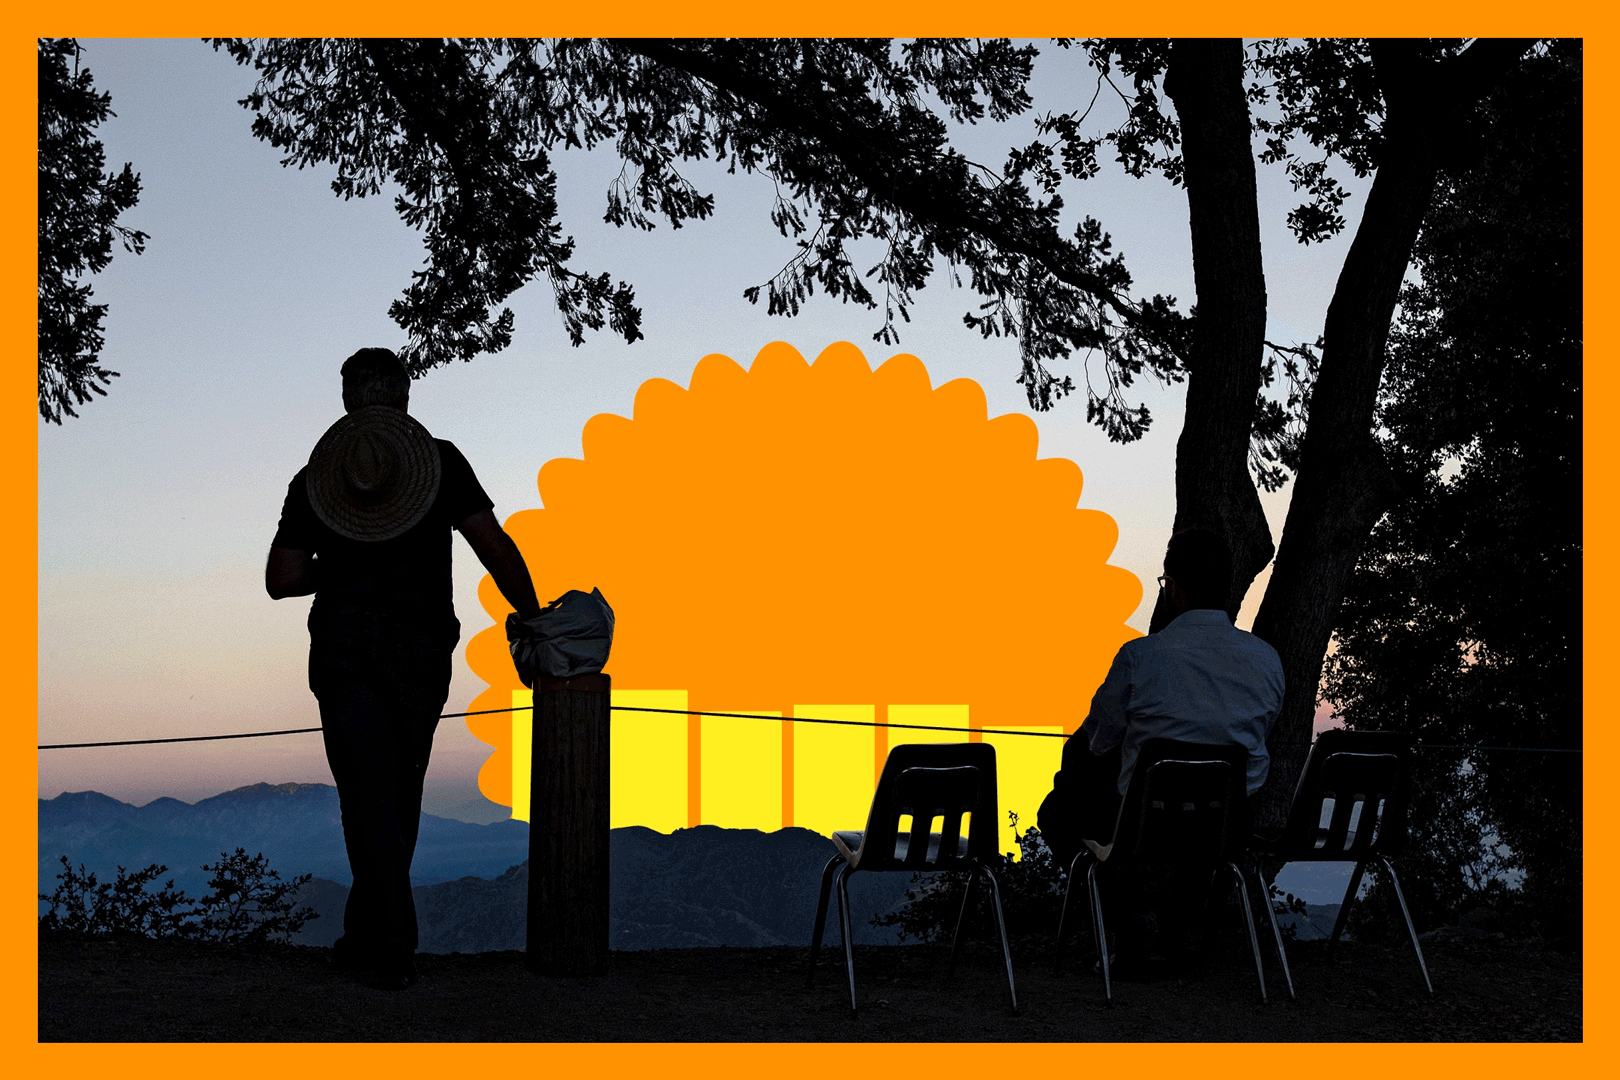 An illustration of hikers under trees next to a picnic bench watching a rotating sun 